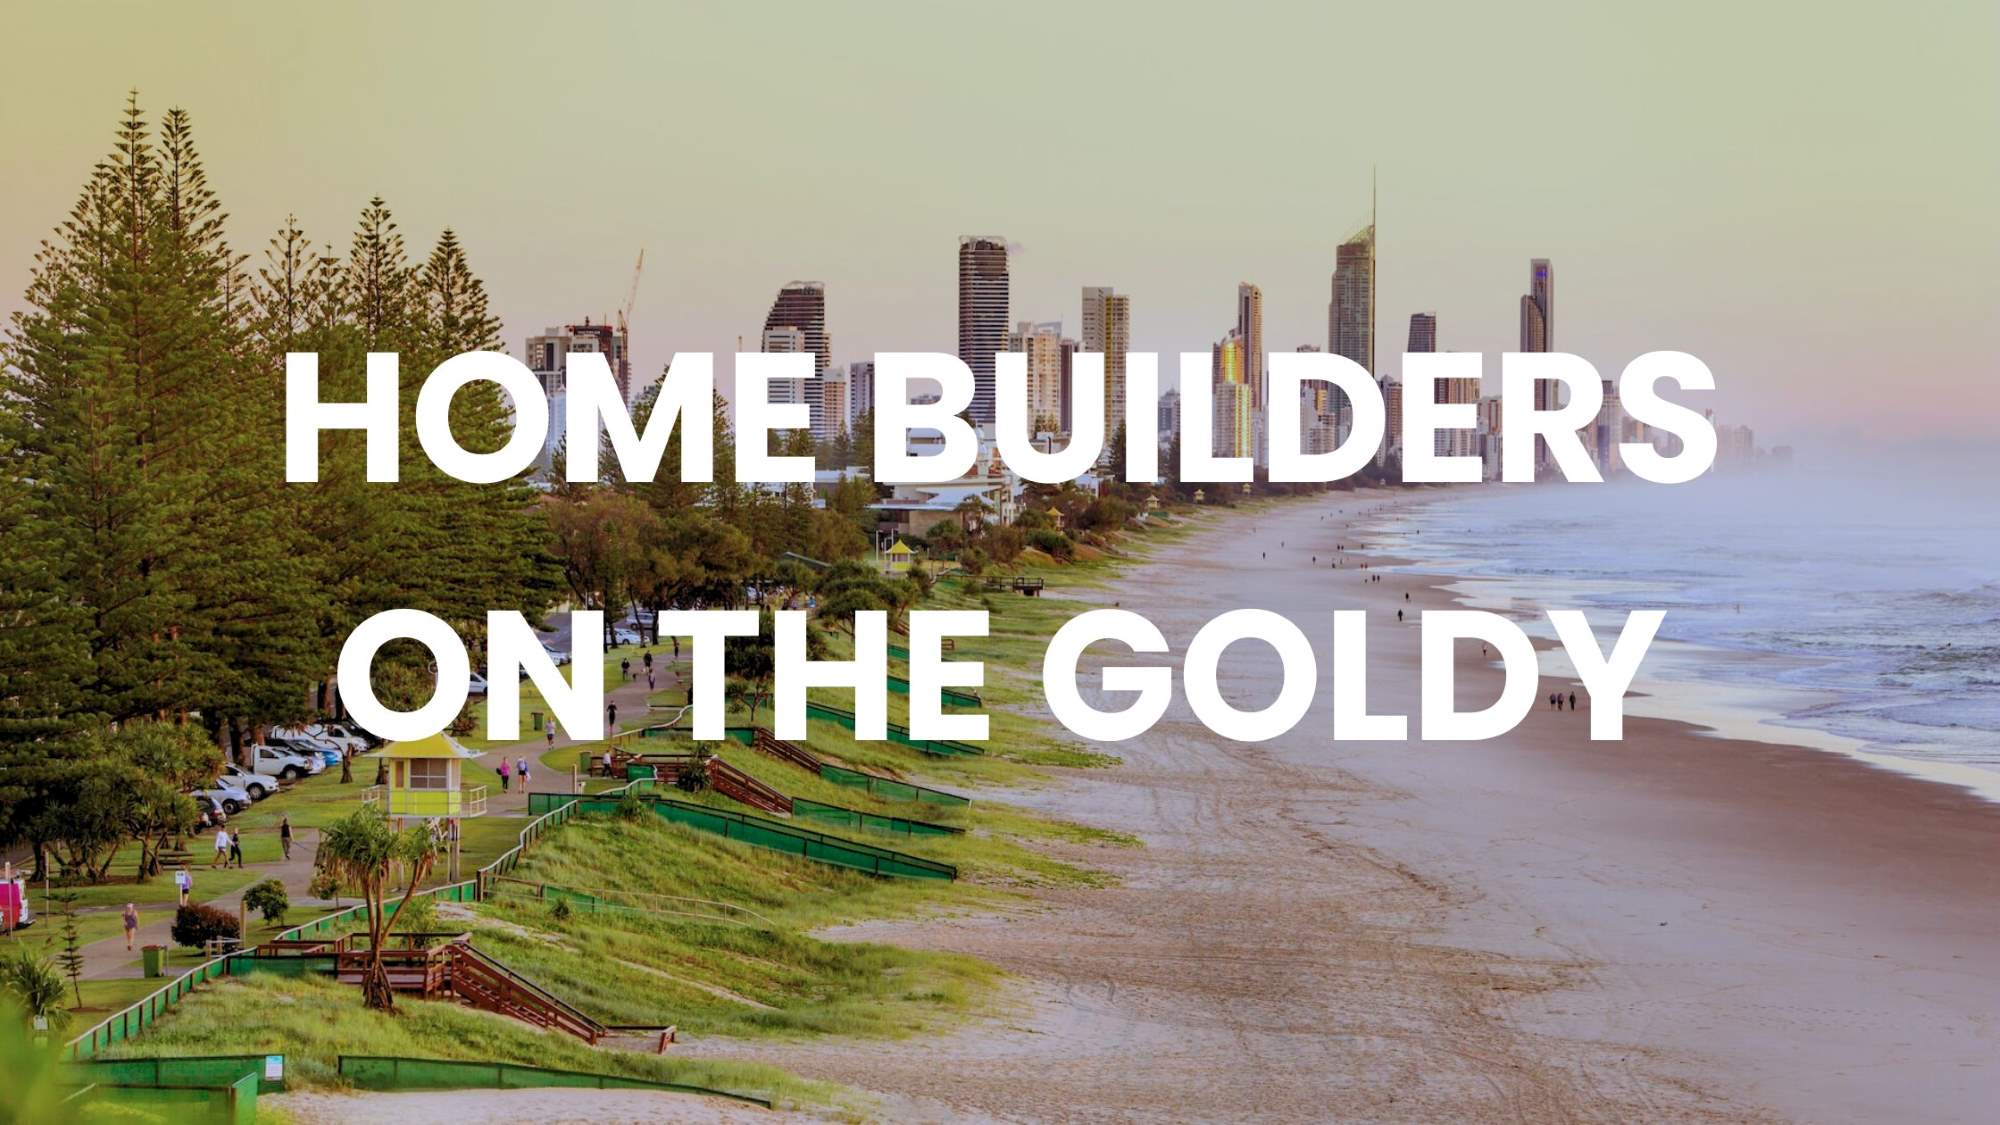 View from Miami Beach to Surfers Paradise, Gold Coast, with text "HOME BUILDERS ON THE GOLDY"